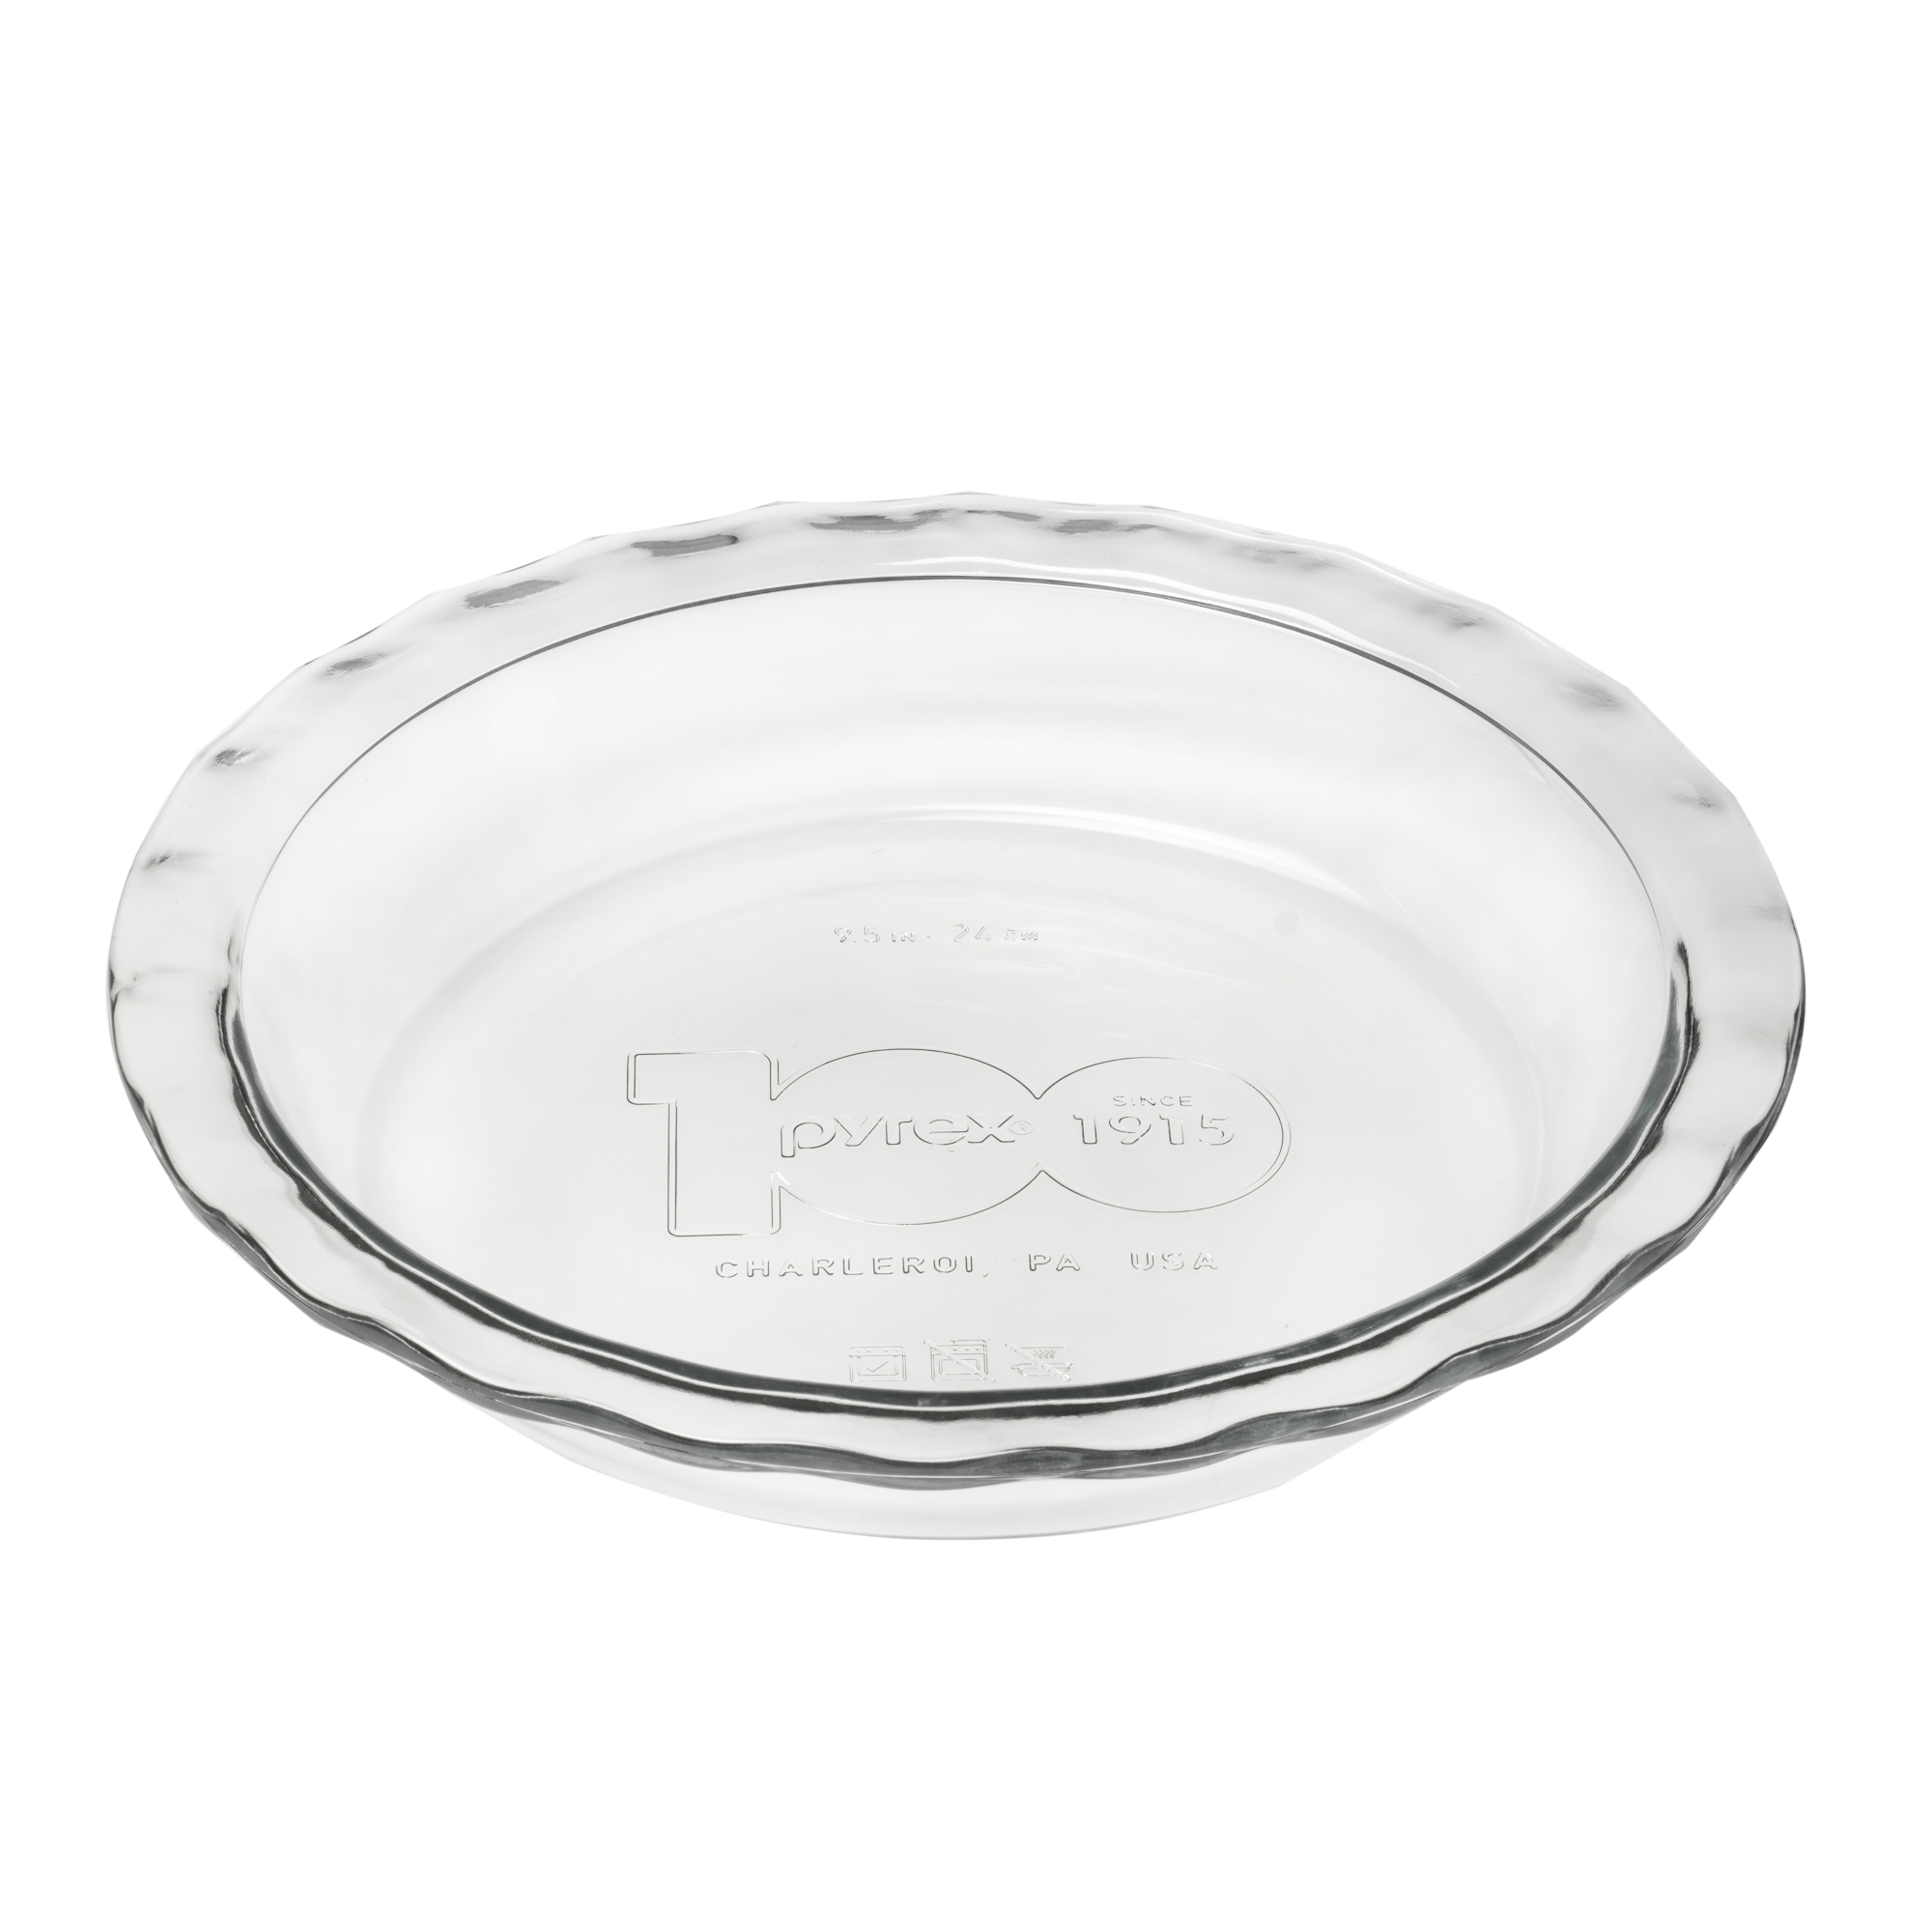 Pyrex Easy Grab 9.5" Glass Pie Plate - image 1 of 11